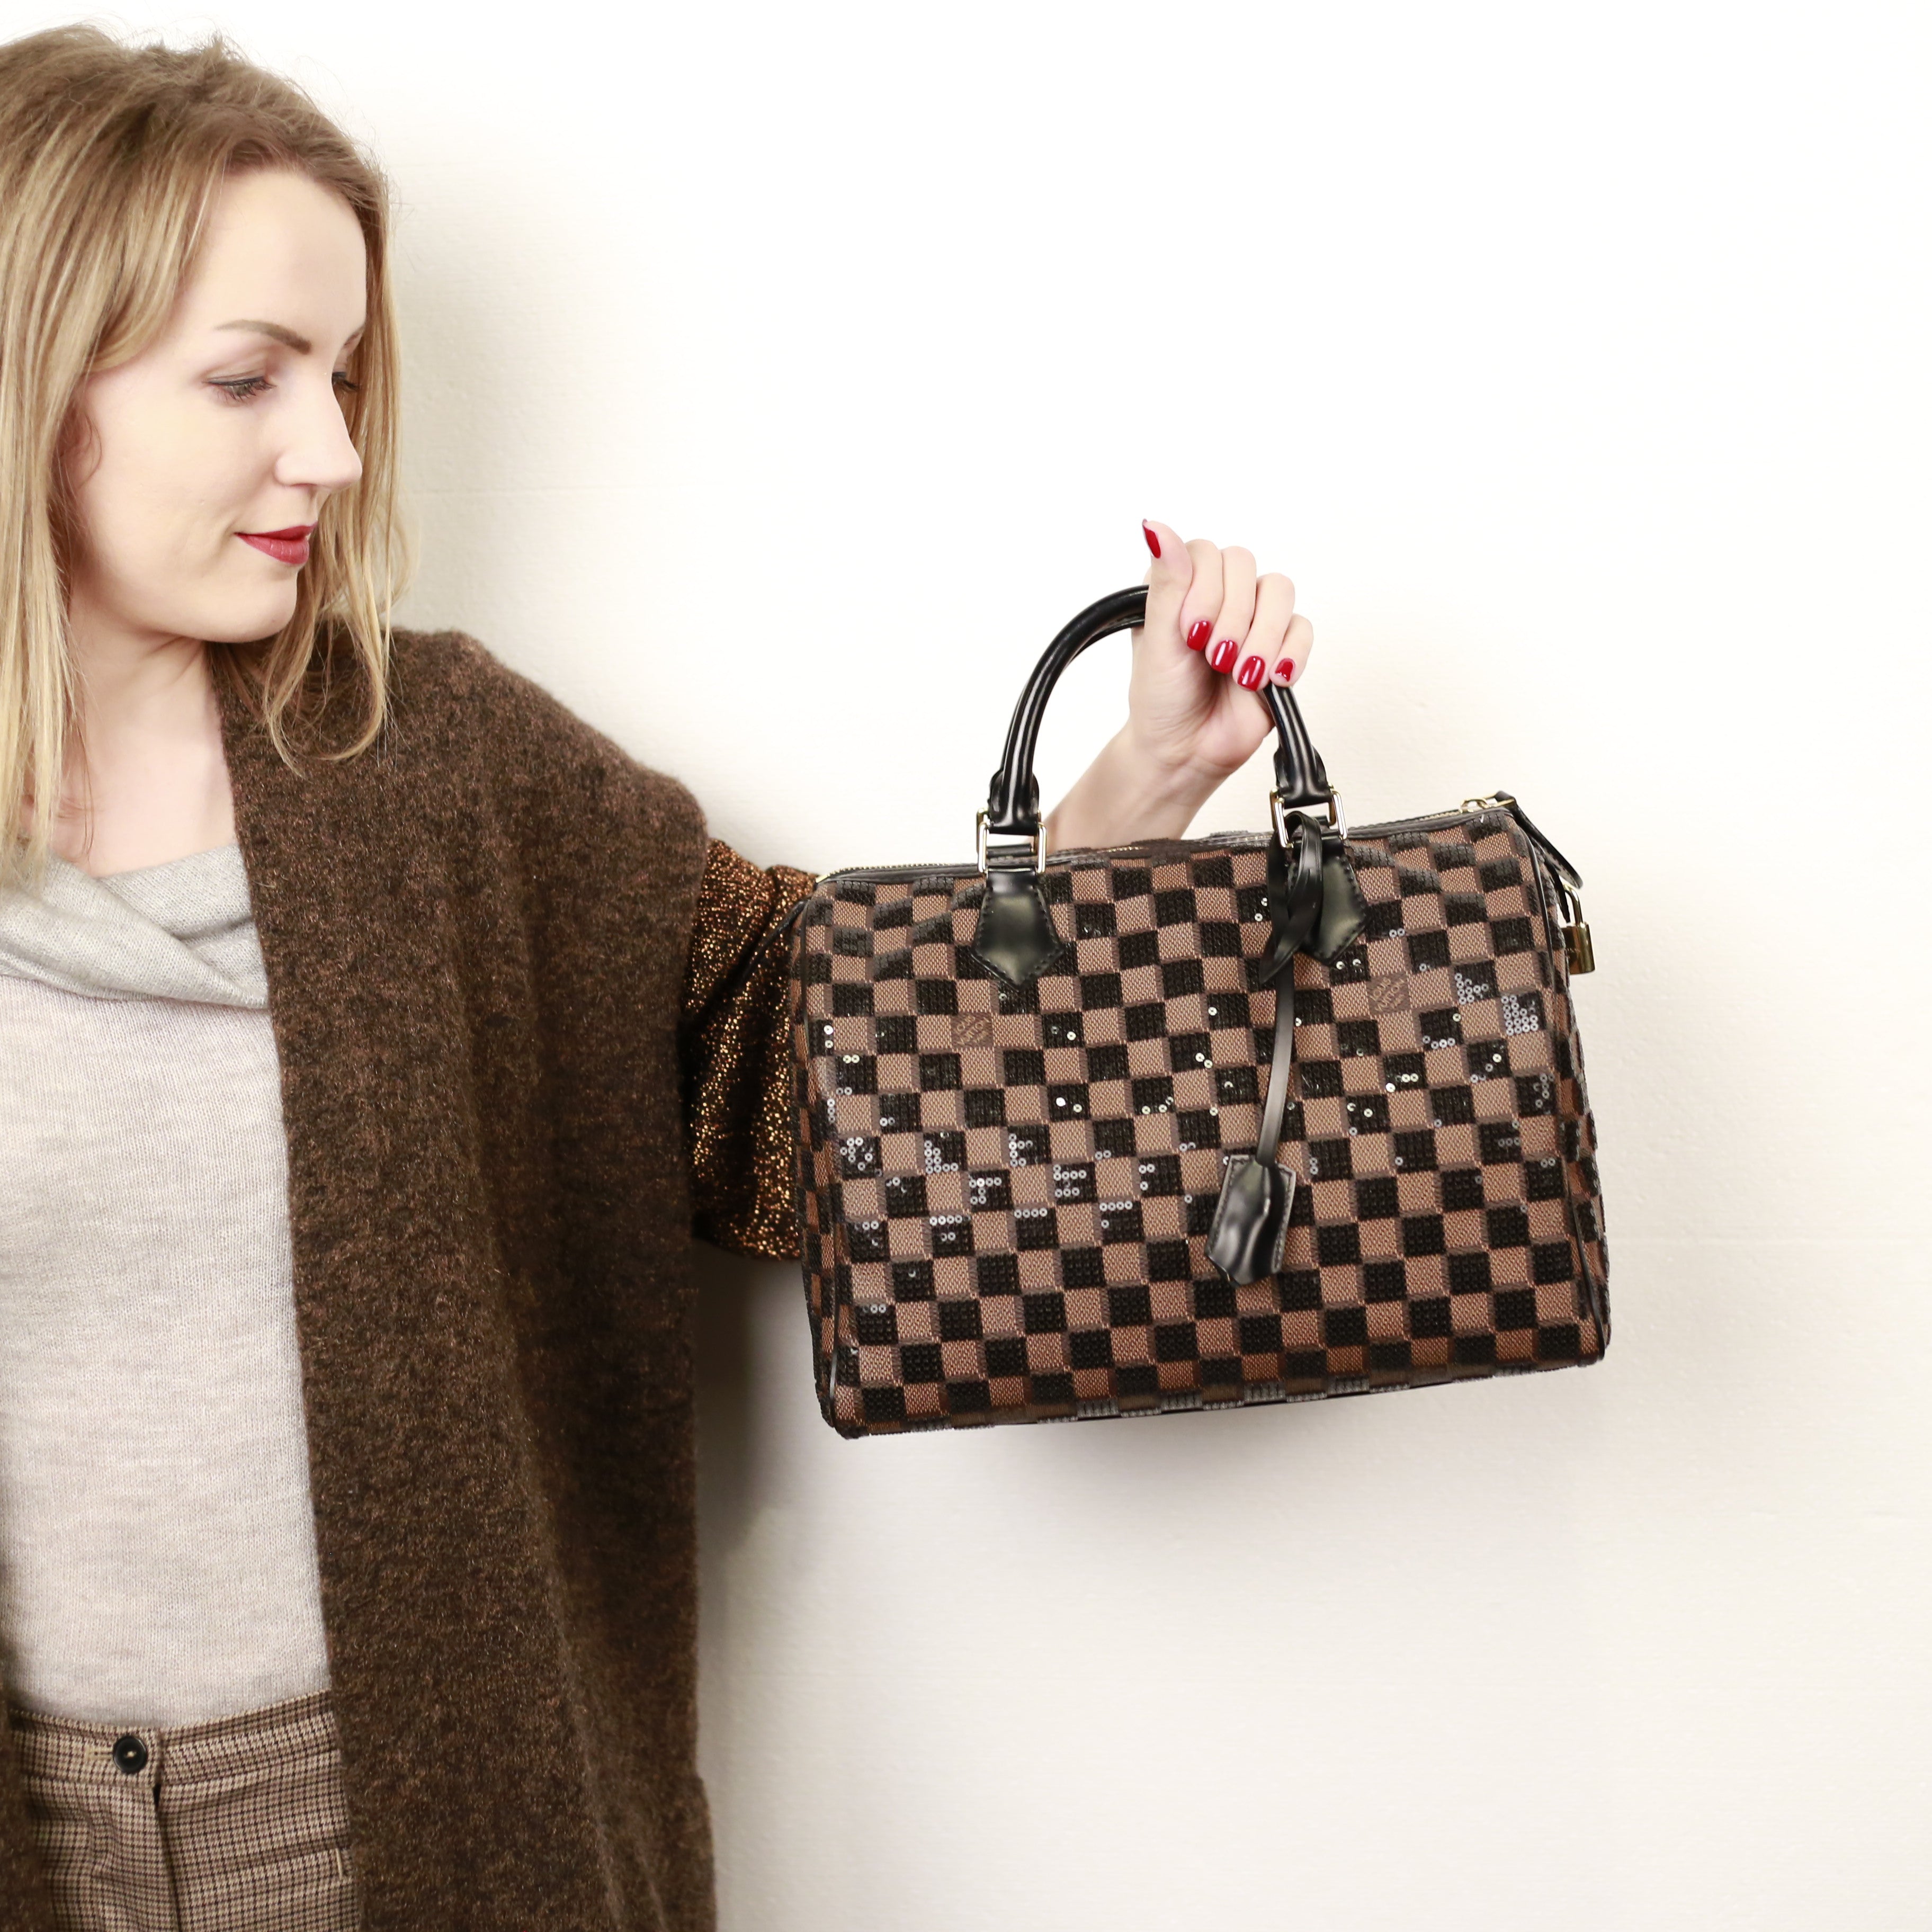 How To Remove Initials Off a Louis Vuitton Leather Bag In 5 Minutes  #removeinitials #lvinitials 